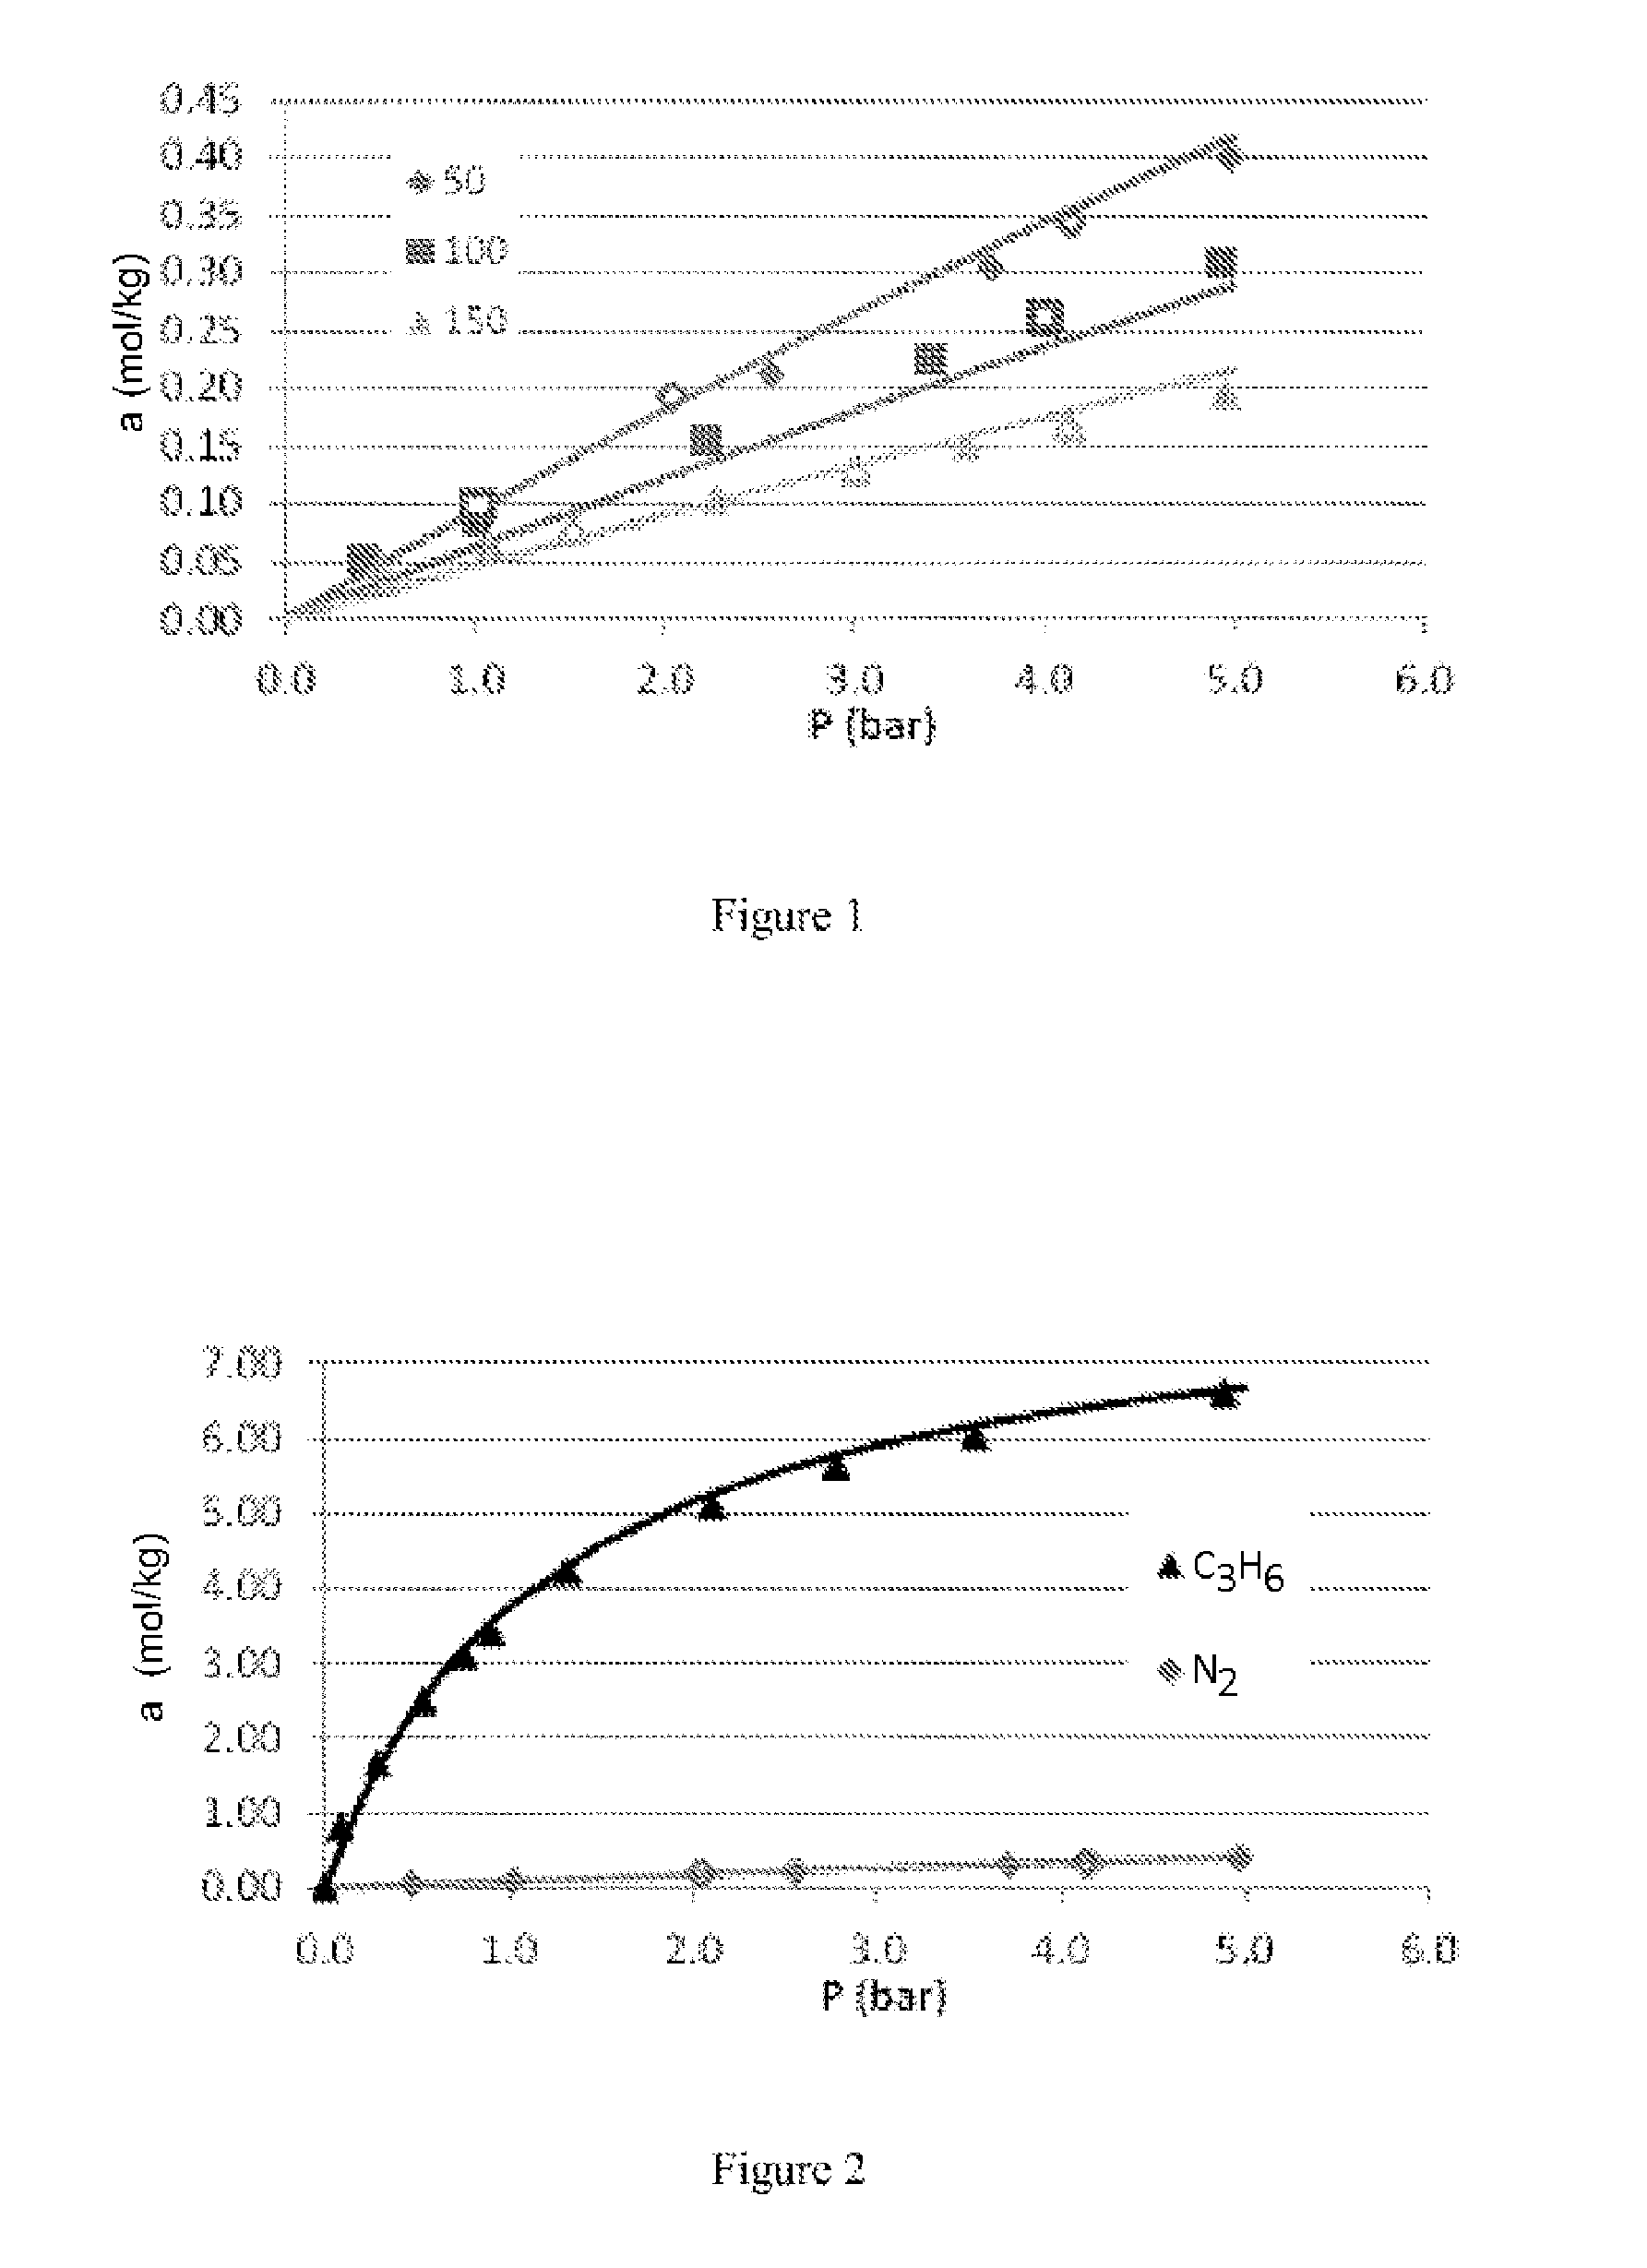 Cyclical method of producing high-purity nitrogen and optionally a high-purity hydrocarbon from a feedstock containing nitrogen and a hydrocarbon